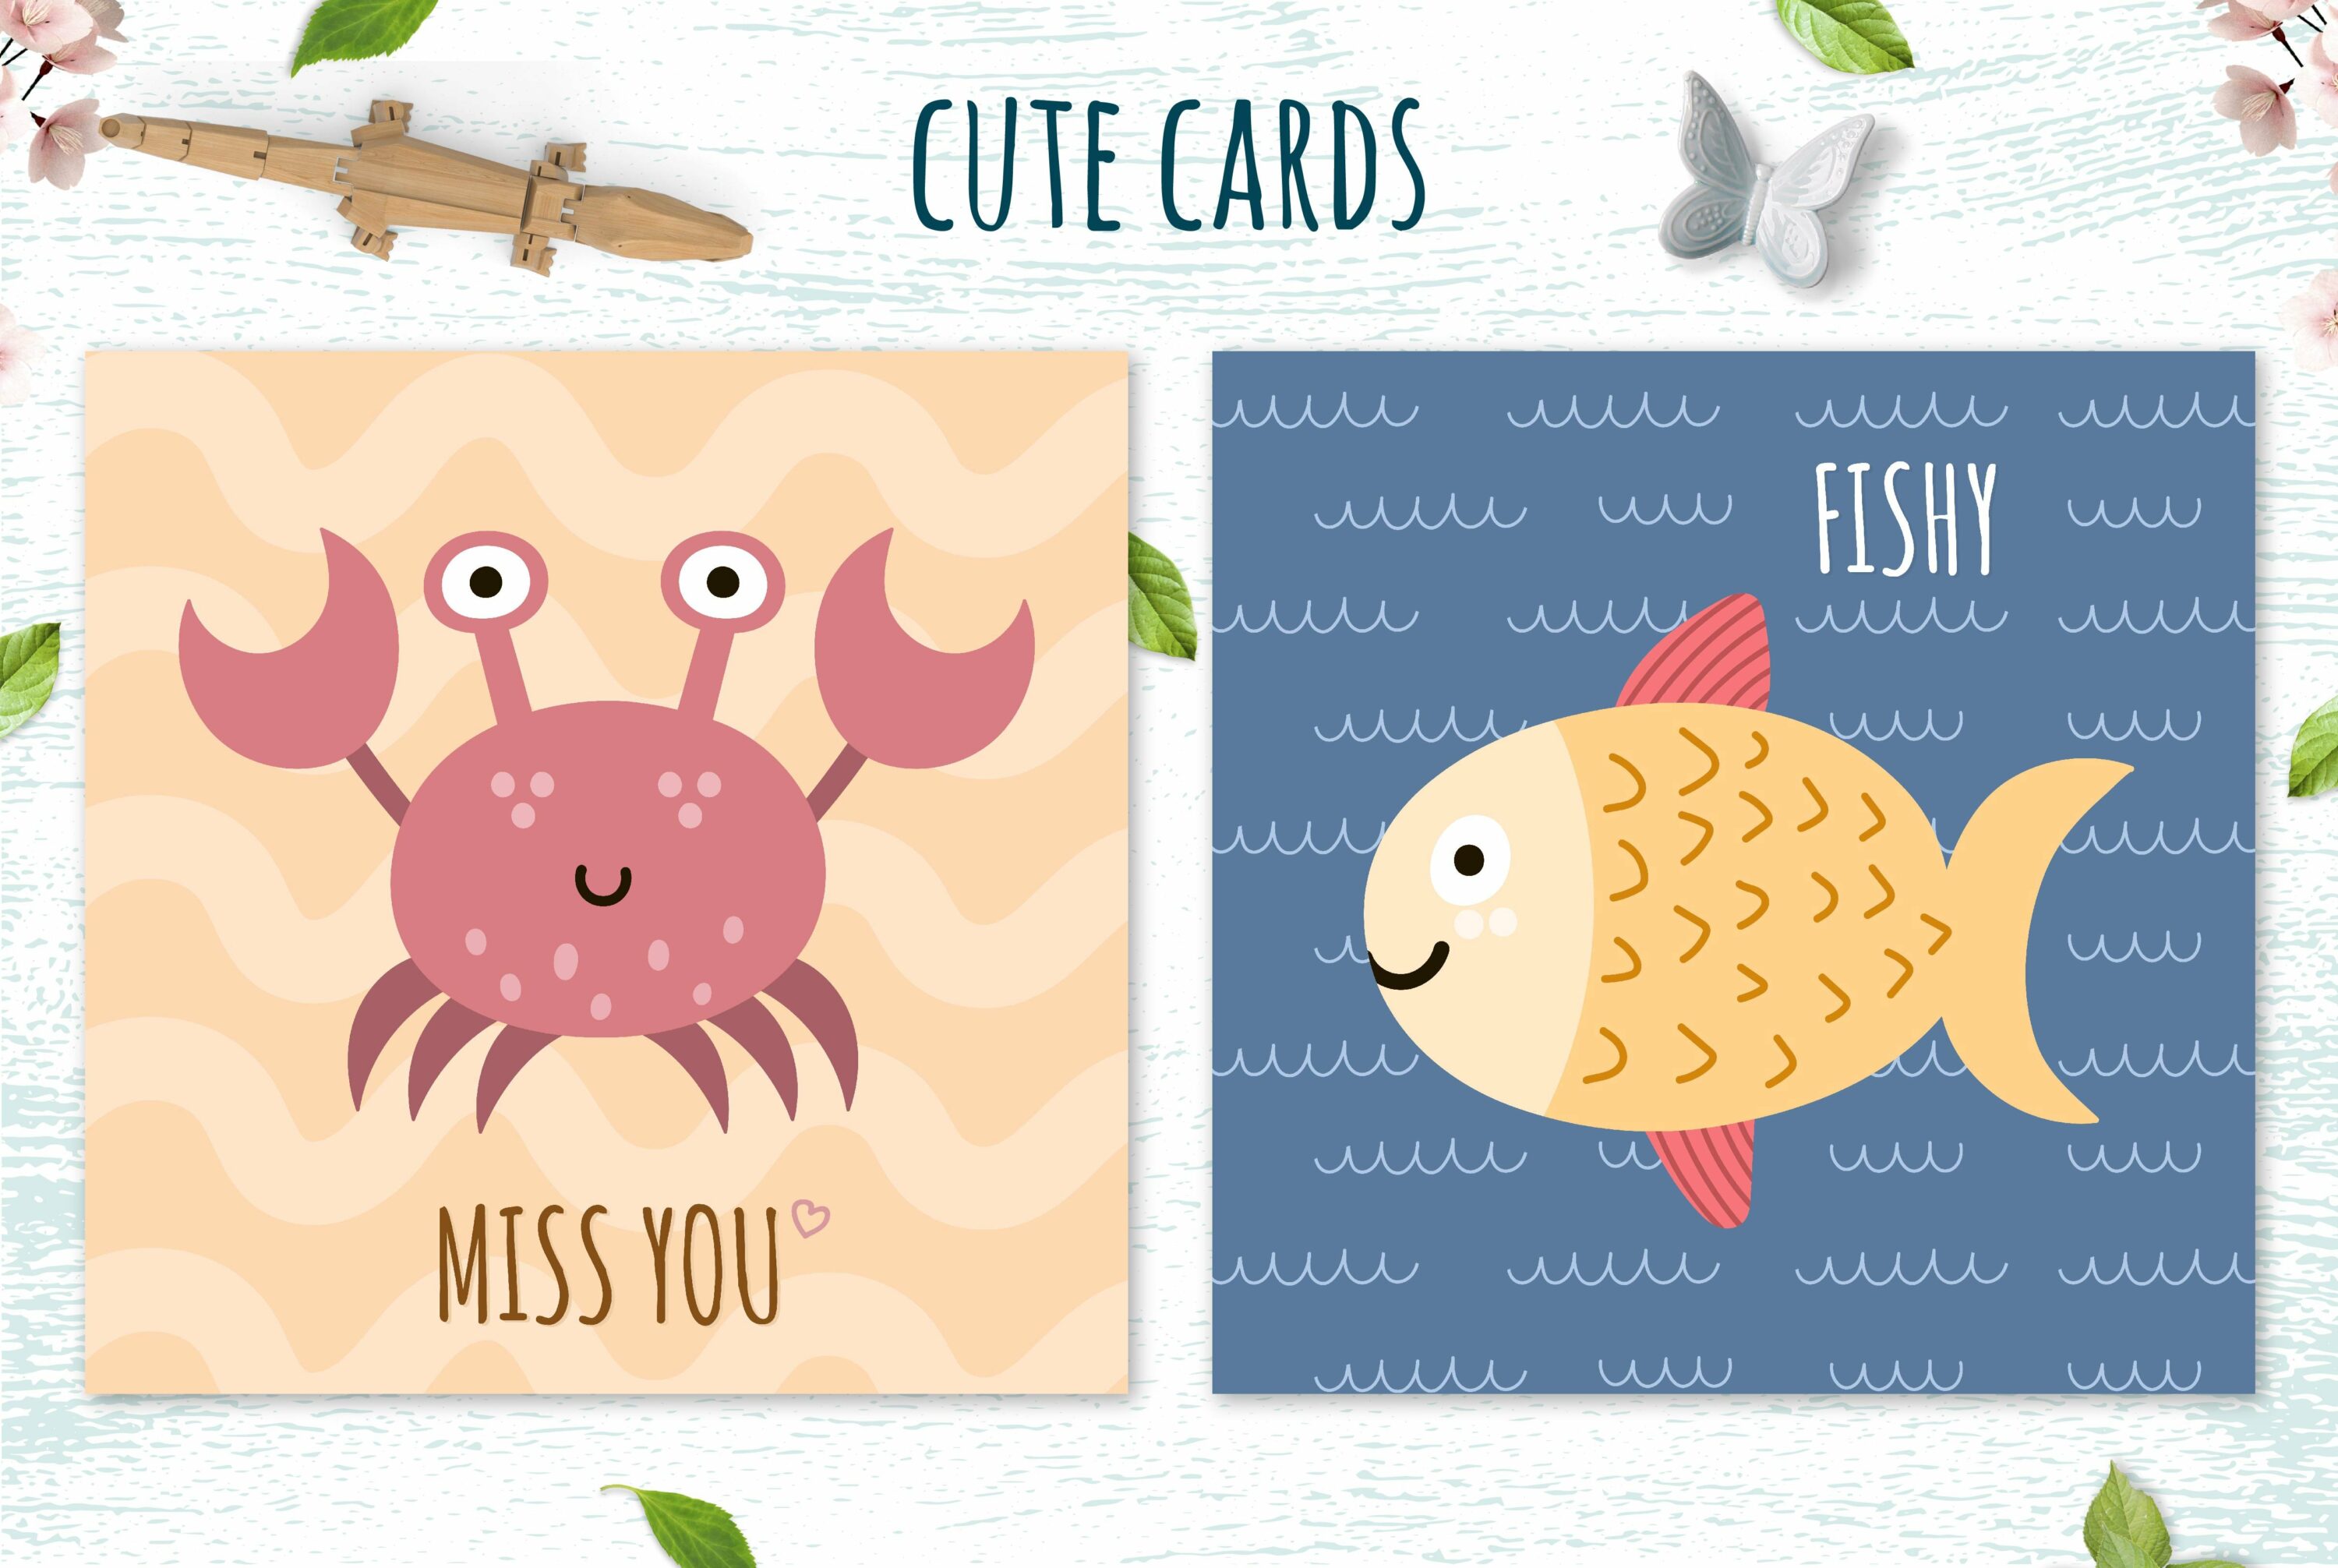 Cute cards with funny cancer and colorful fish.